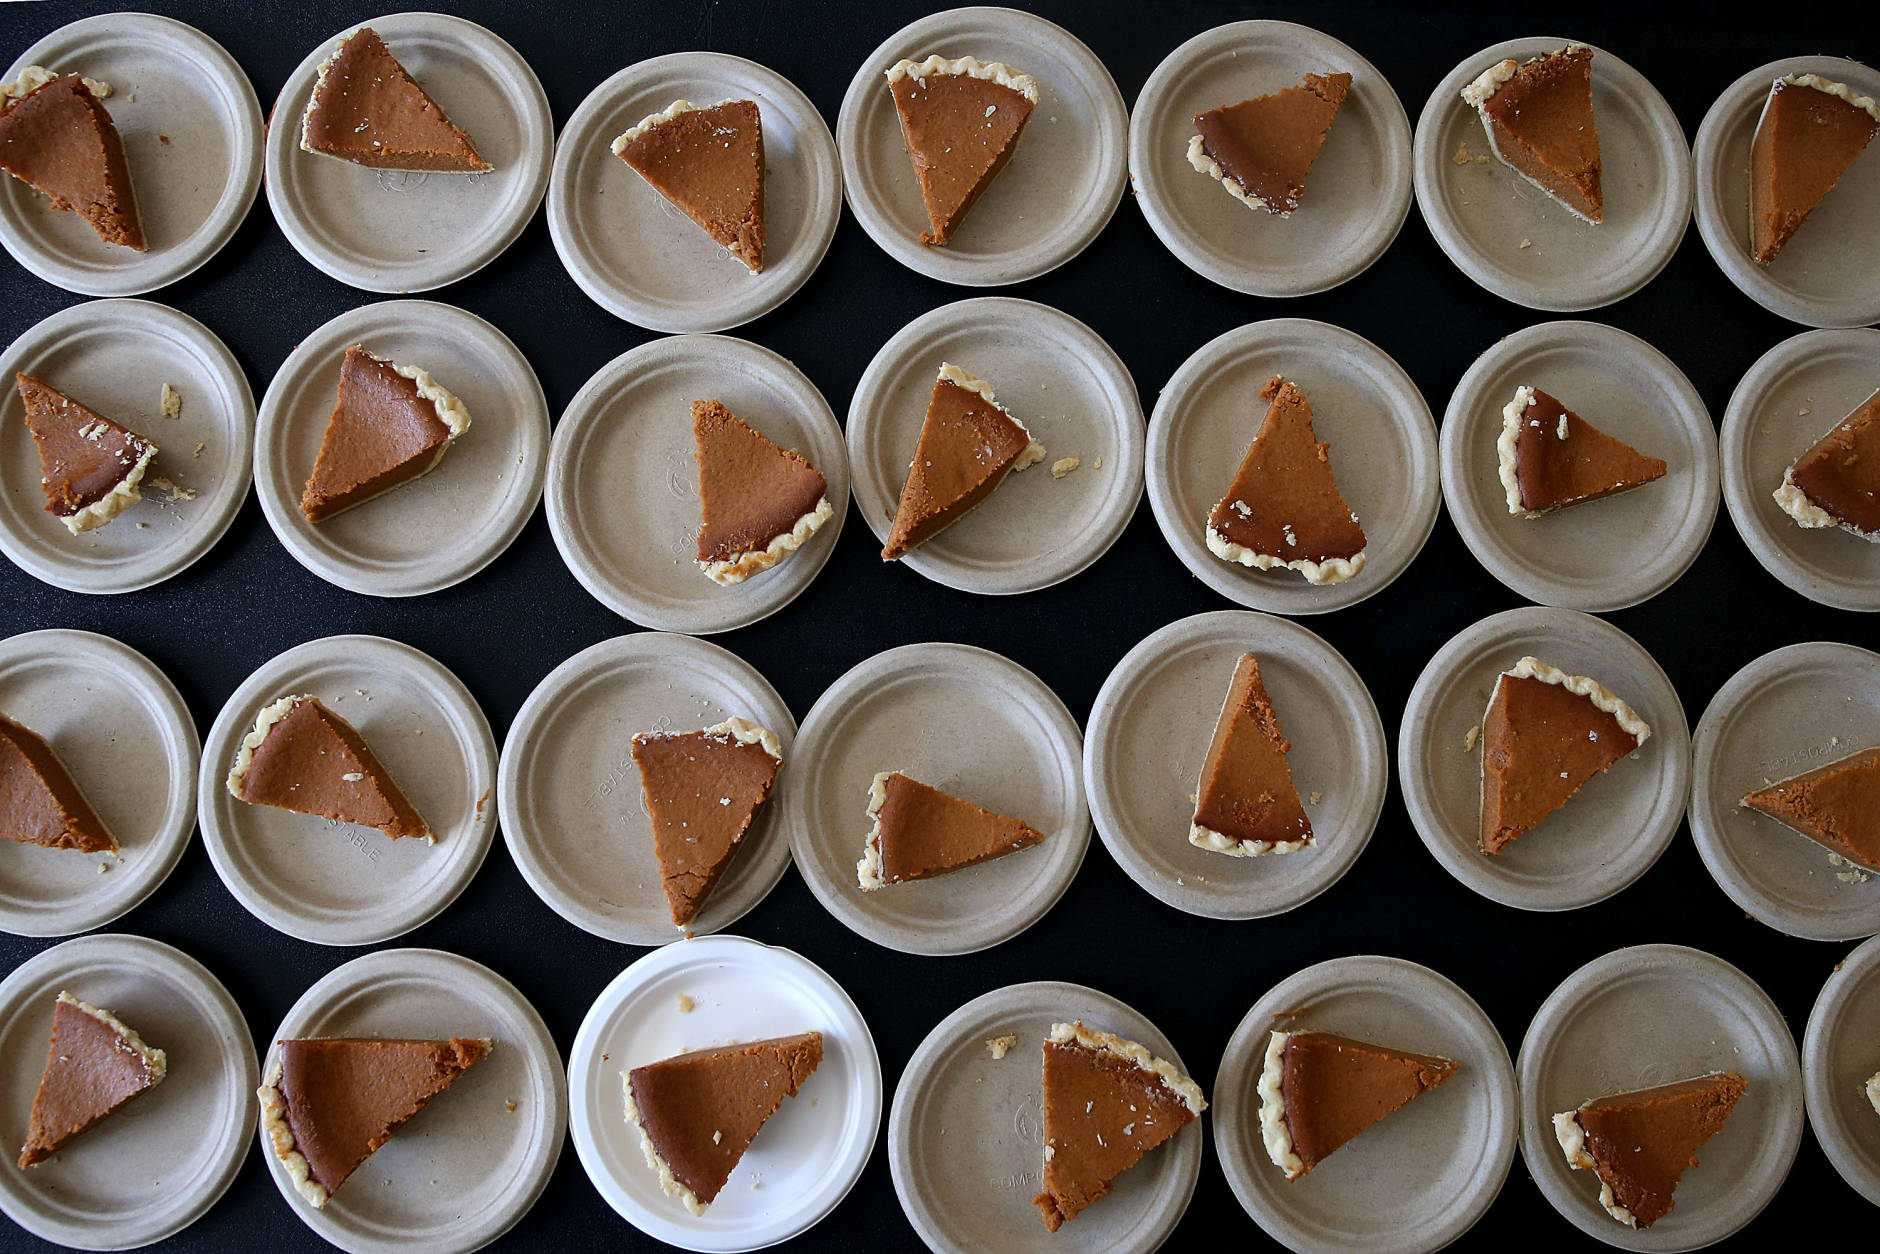 RICHMOND, CA - NOVEMBER 25:  Slices of pumpkin pie sit on a table during the Great Thanksgiving Banquet hosted by the Bay Area Rescue Mission on November 25, 2015 in Richmond, California. Hundreds of homeless and needy people were given a free meal a day before Thanksgiving.  (Photo by Justin Sullivan/Getty Images)